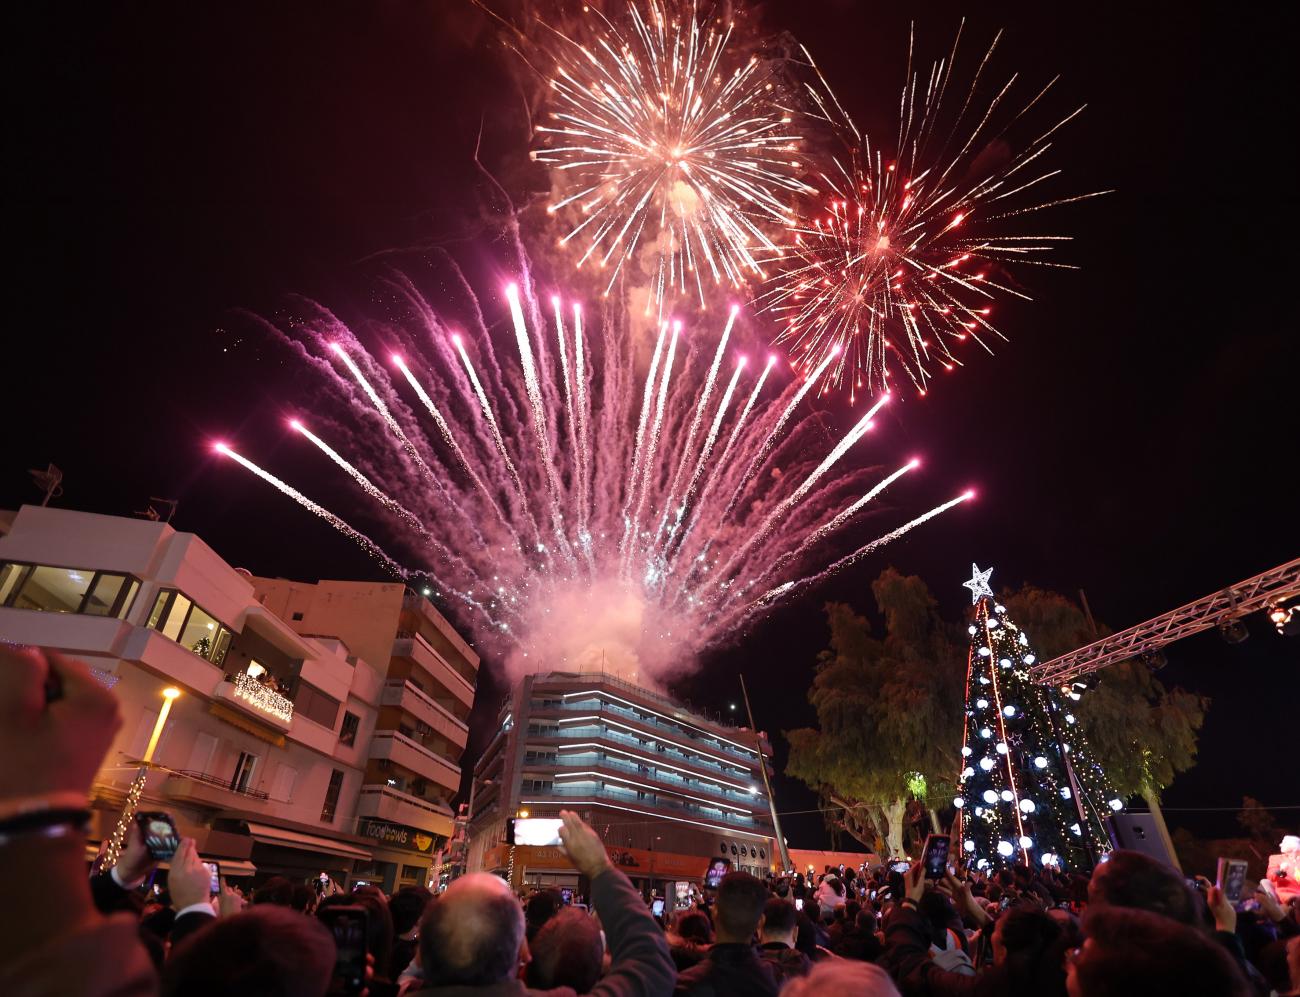 Welcoming the New Year in Heraklion